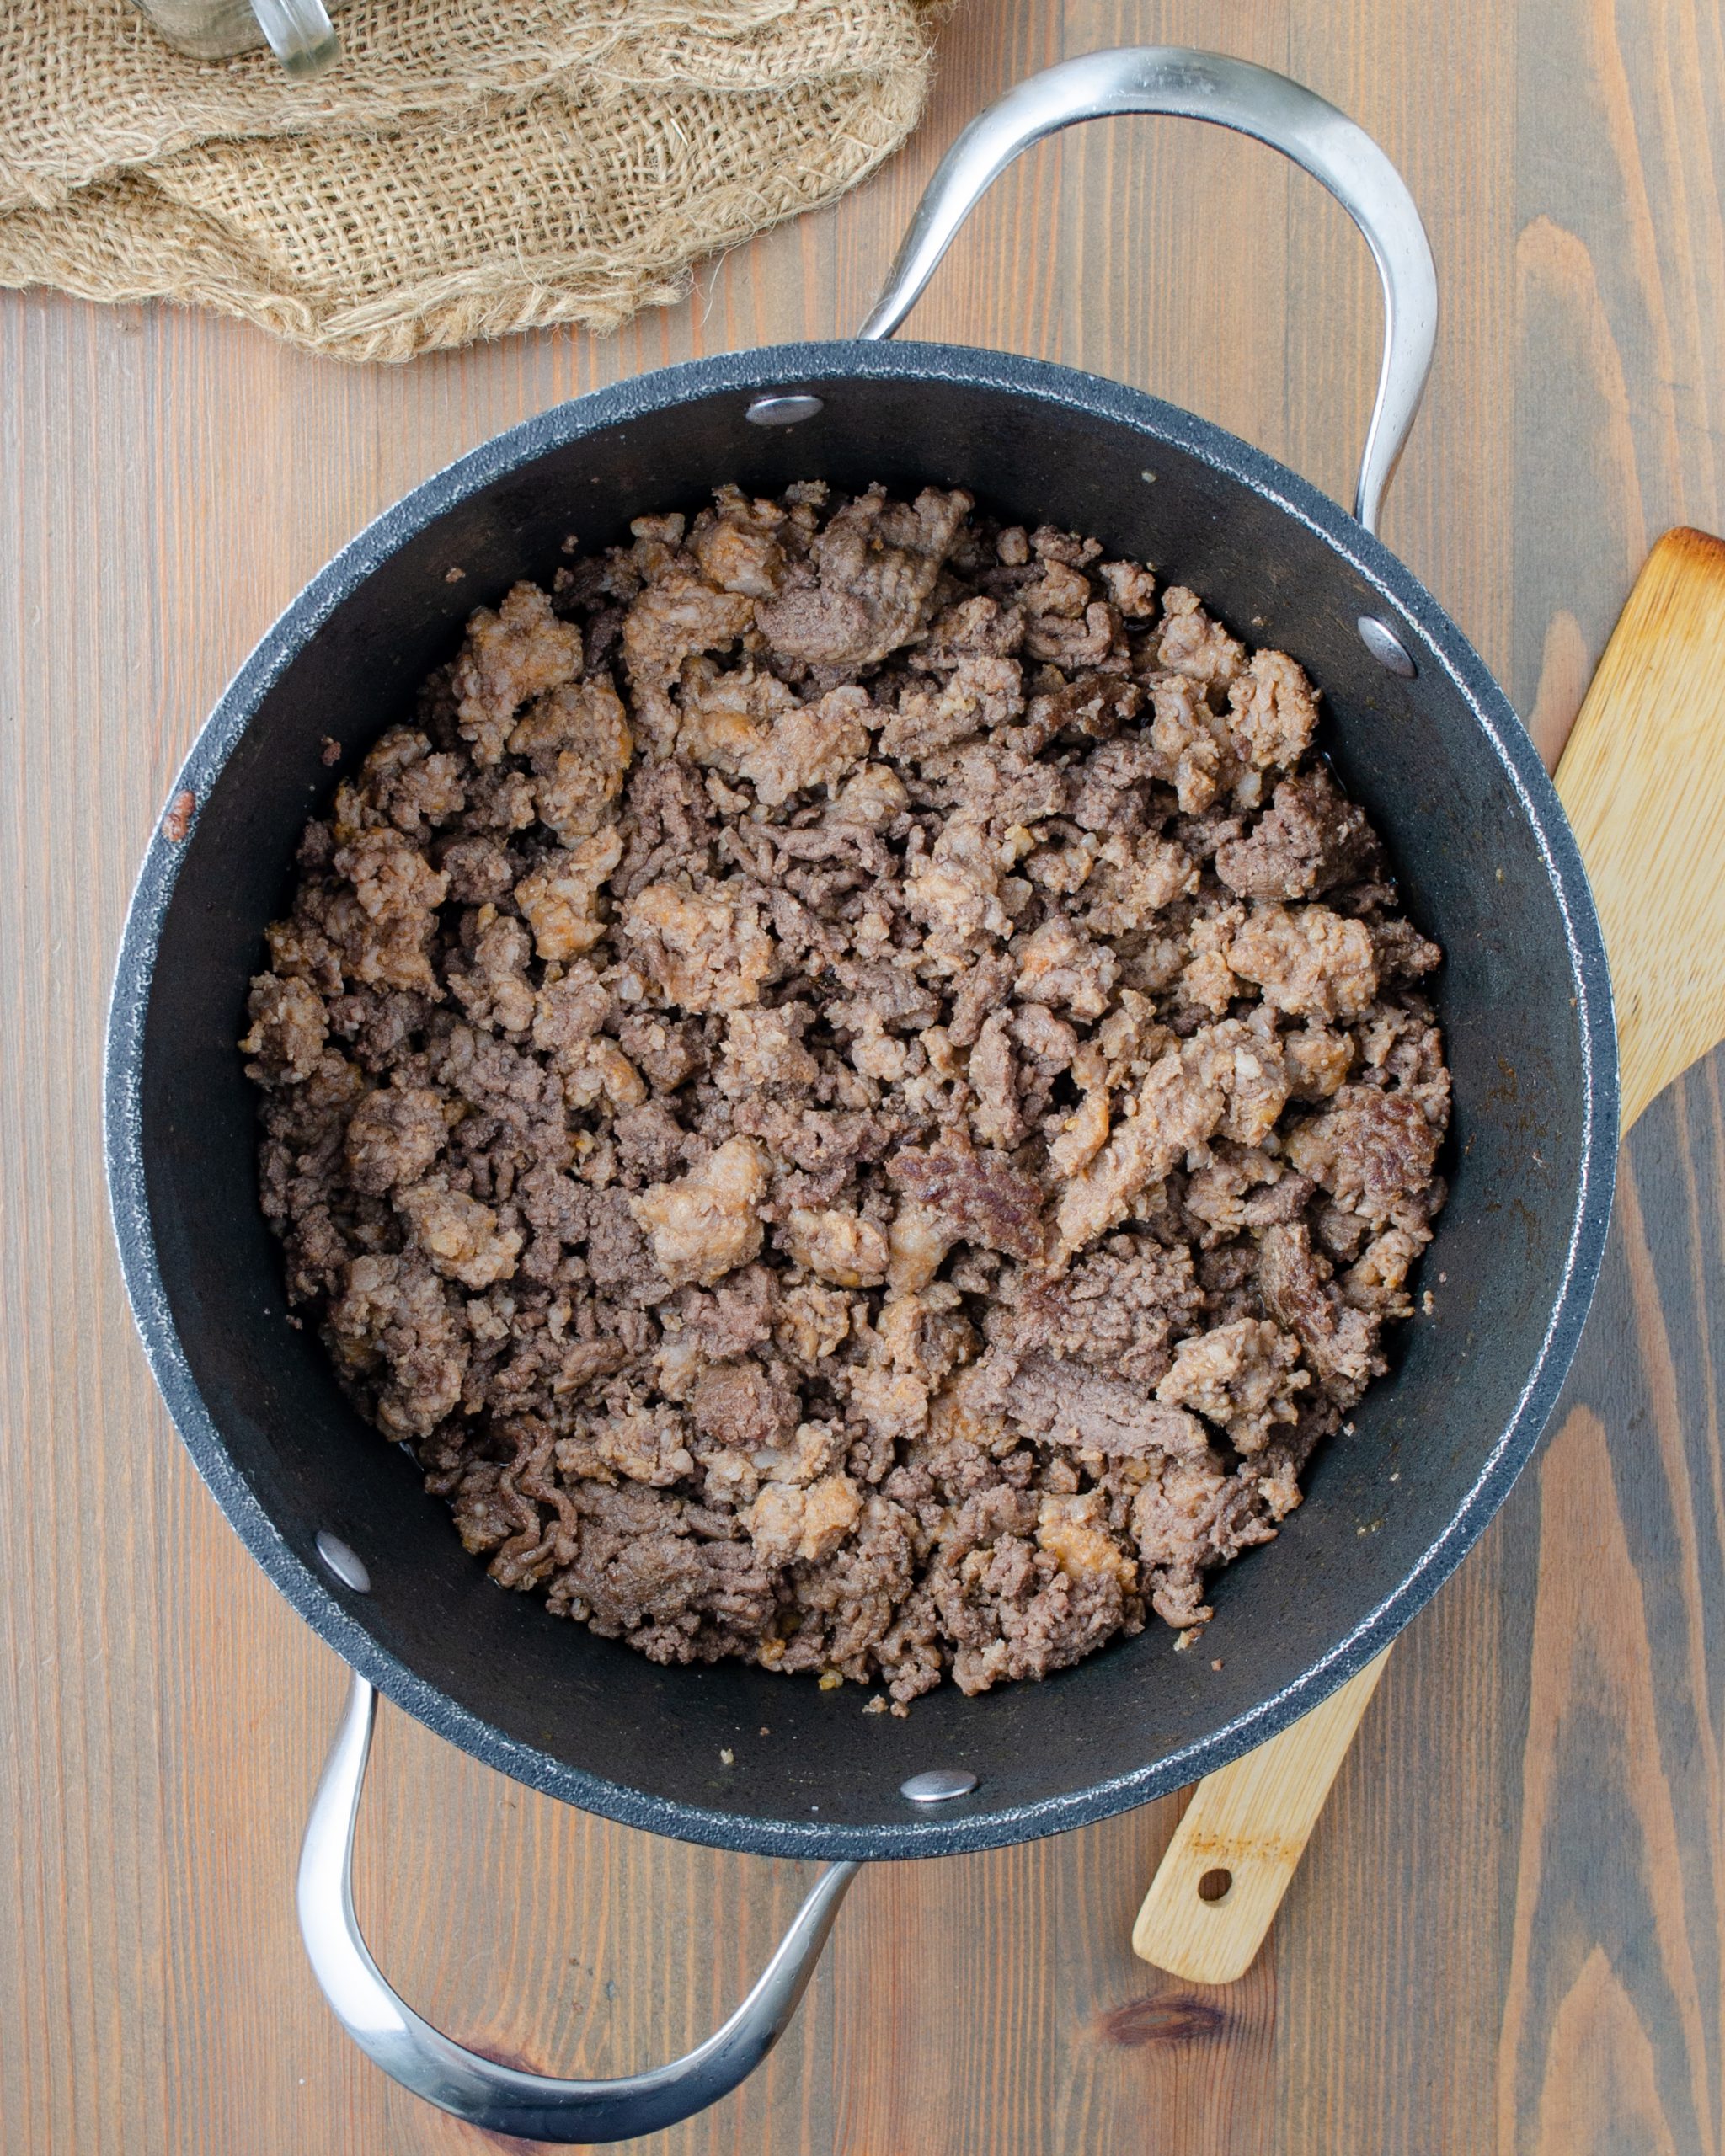 Add the ground beef, onion, and sausage to a large pot over medium-high heat, and cook until completely browned. Drain any excess fat. 